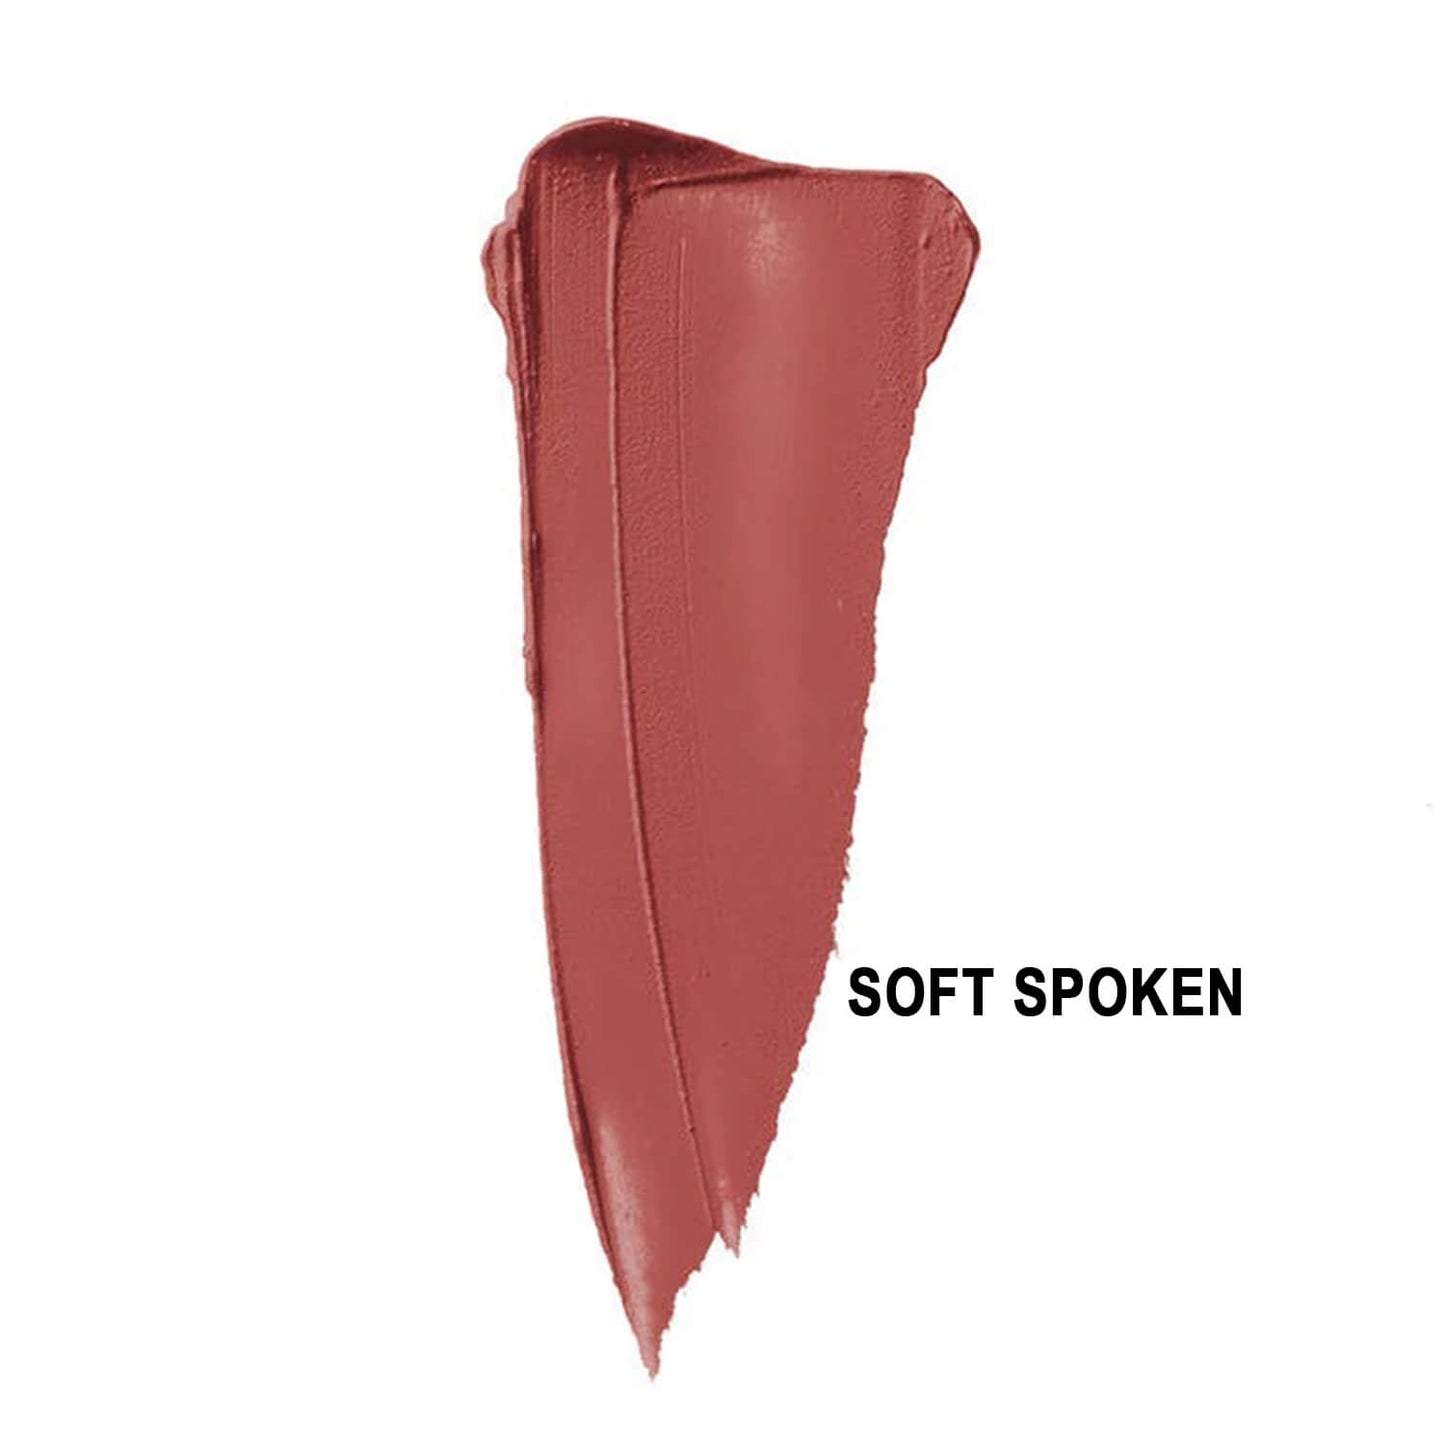 NYX Liquid Suede Cream Lipstick swatch of soft spoken available at Heygirl.pk for delivery in Pakistan